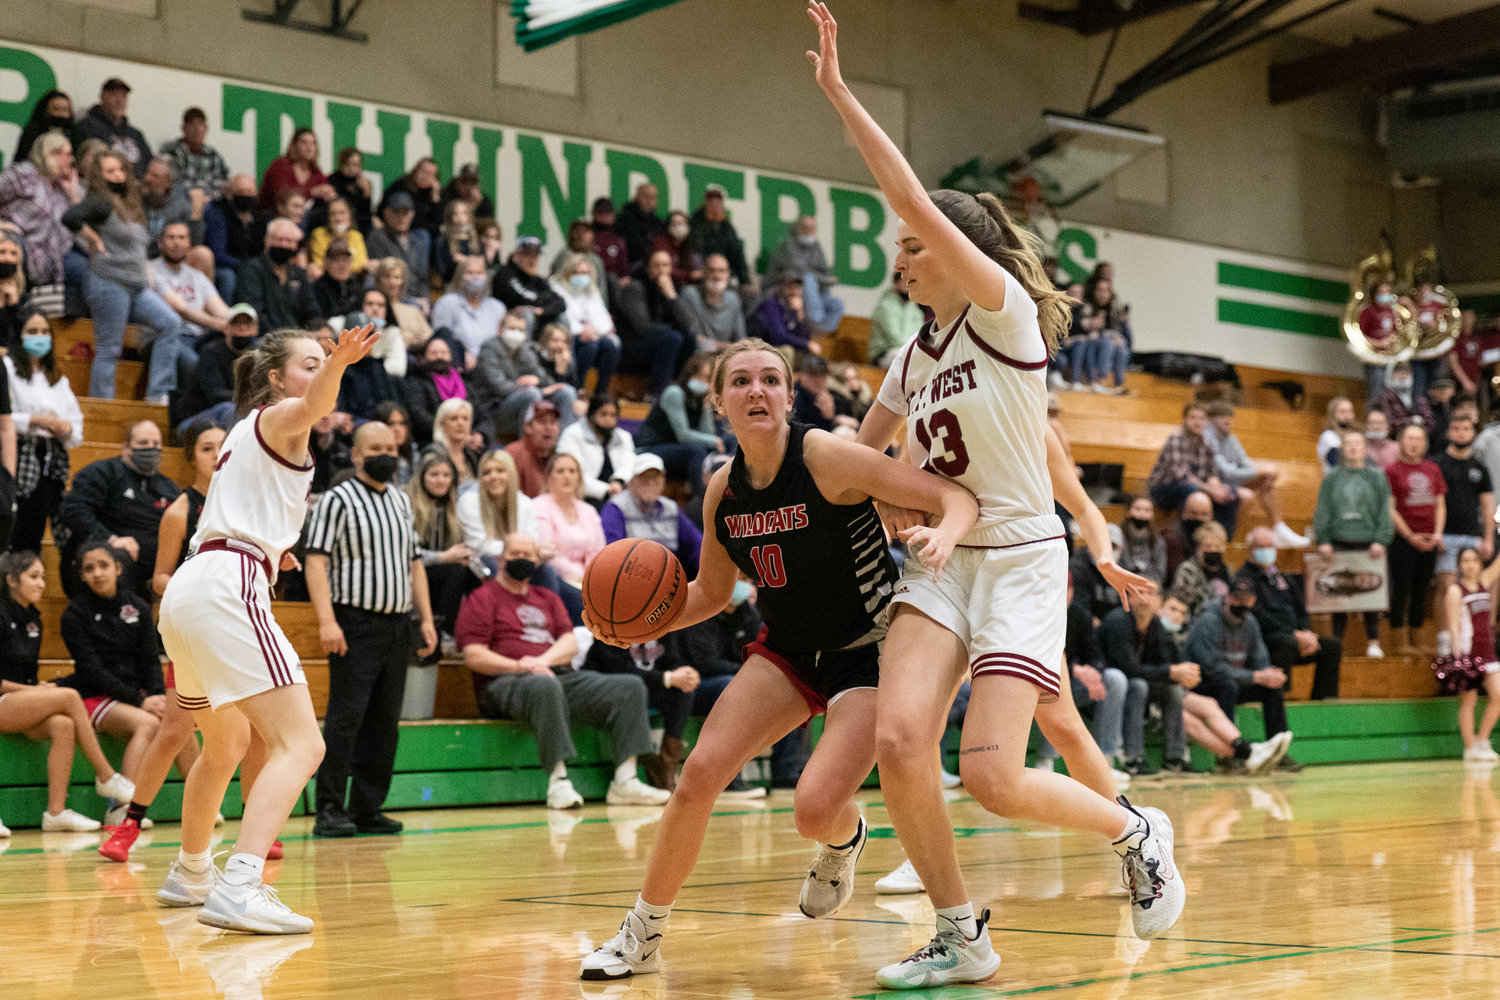 Archbishop Murphy guard Hannah Humphrey drives against W.F. West's Drea Brumfield in the regional round of the state tournament at Tumwater Feb. 25.